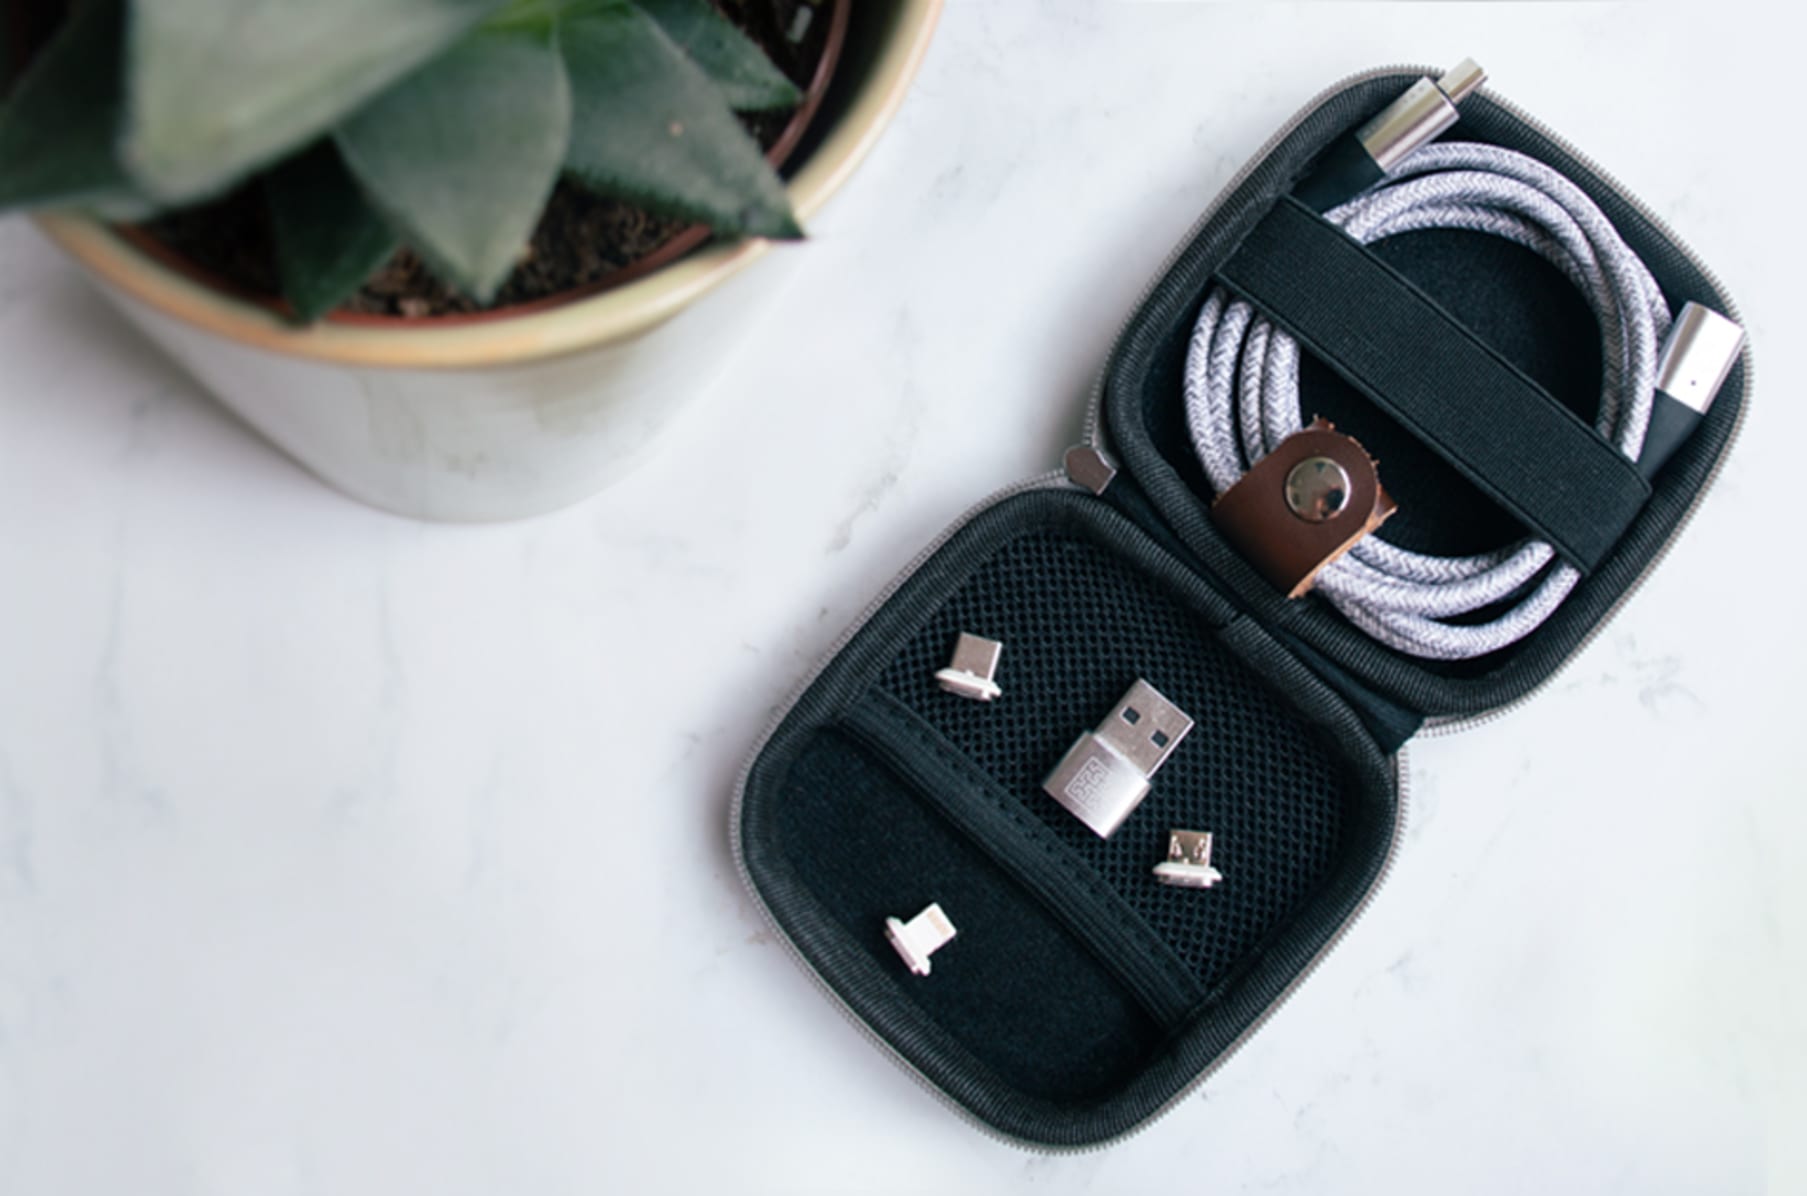 Syllucid Charge: All-in-one charging cable